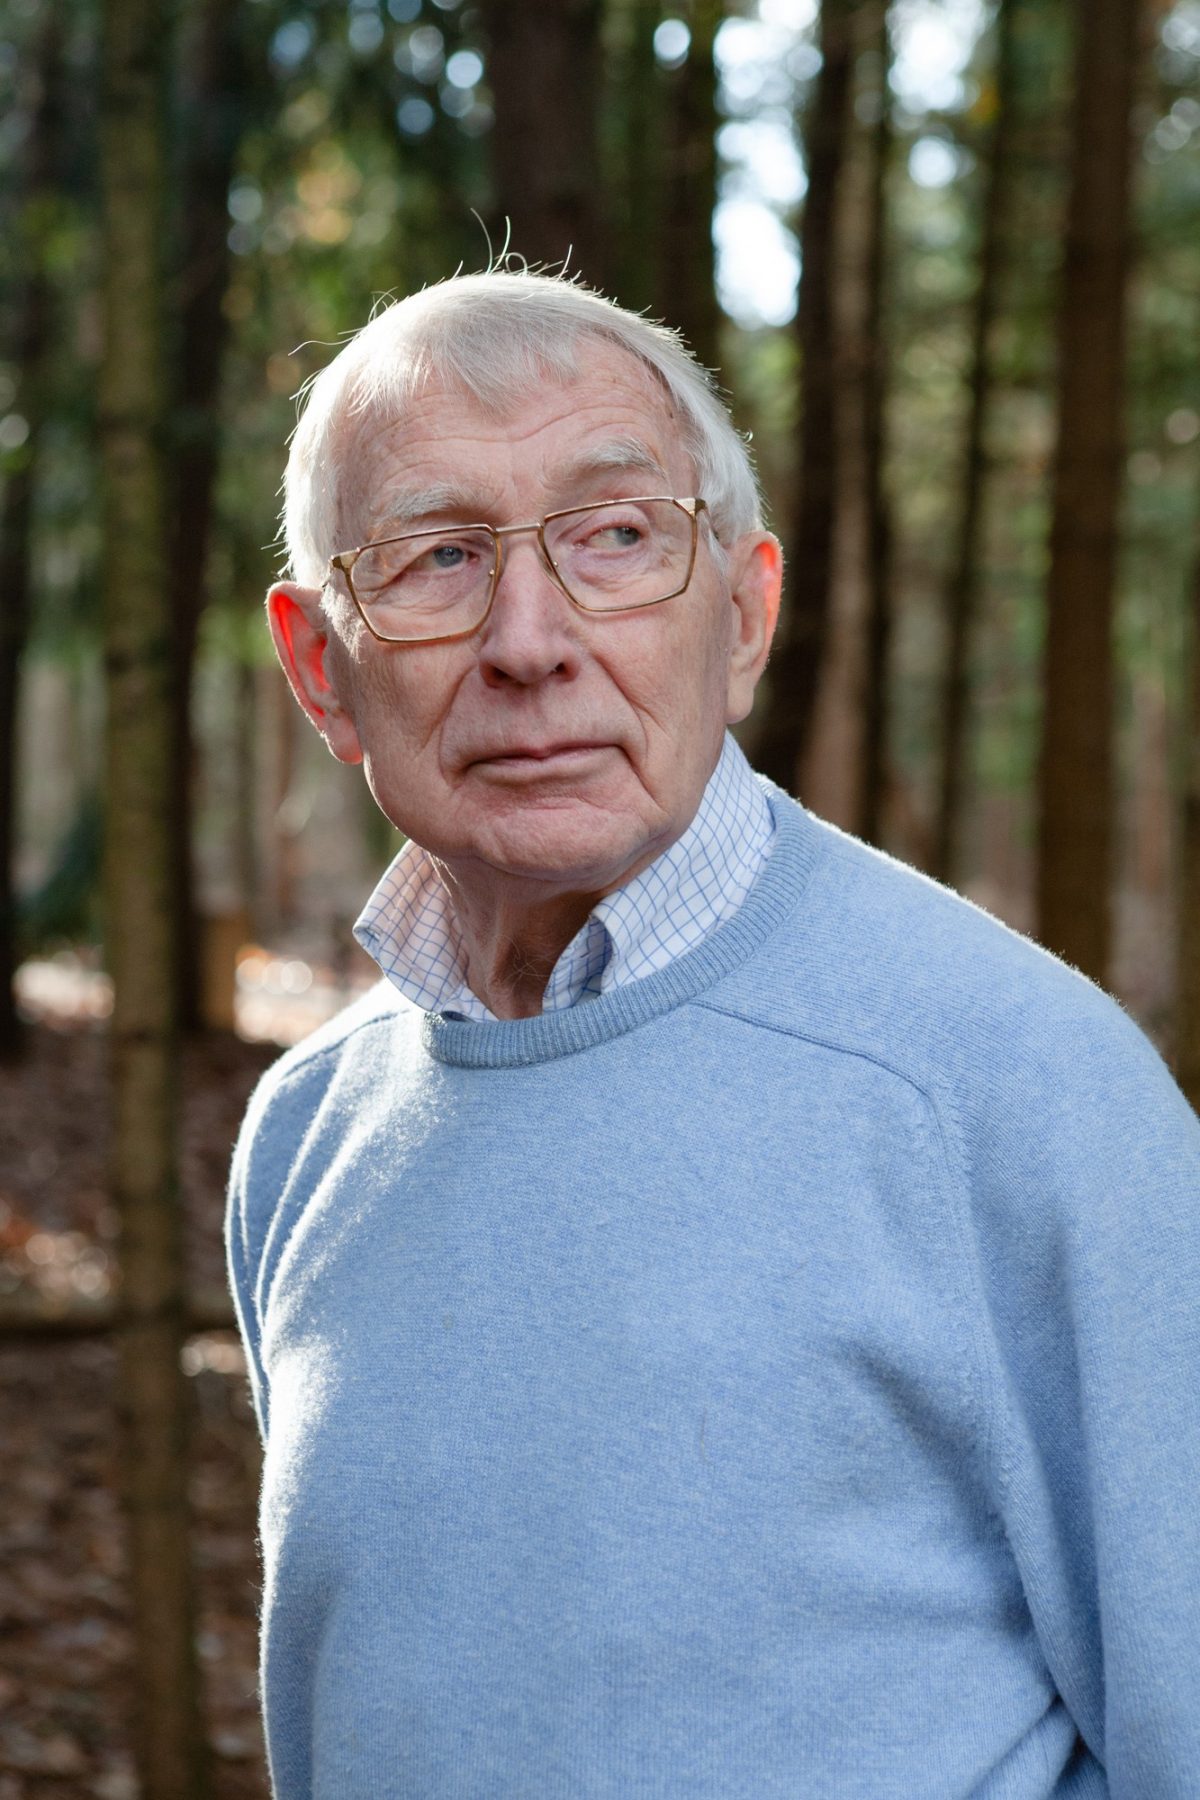 Lou Ottens in his garden in 2007, during an interview for 'De Ingenieur', the periodical of the Dutch Royal Institute of Engineers Jordi Huisman - Jordi Huisman